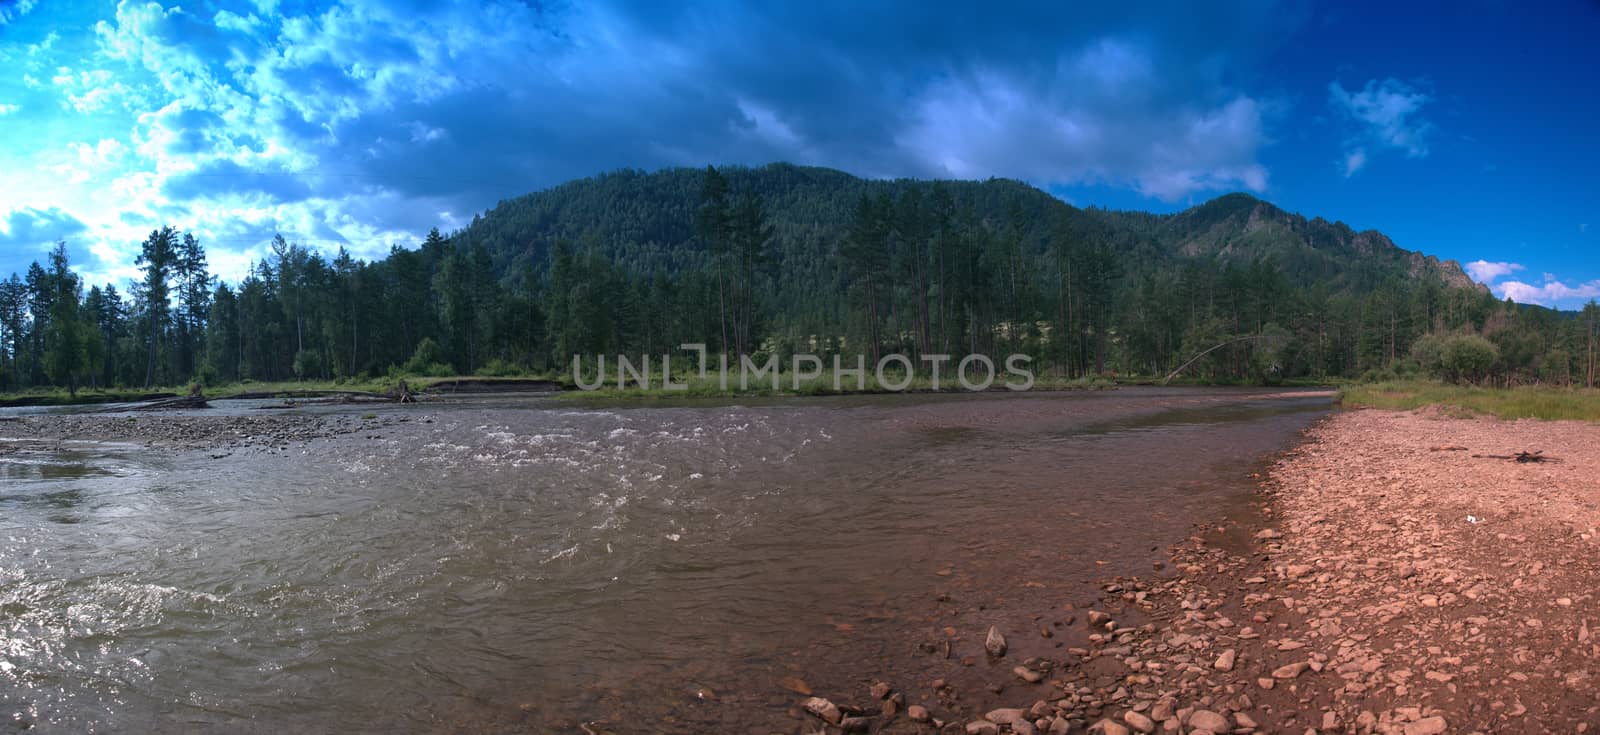 Panoramic picture of the Ursul River flowing at the foot of the mountain ranges. Altai, Siberia, Russia.